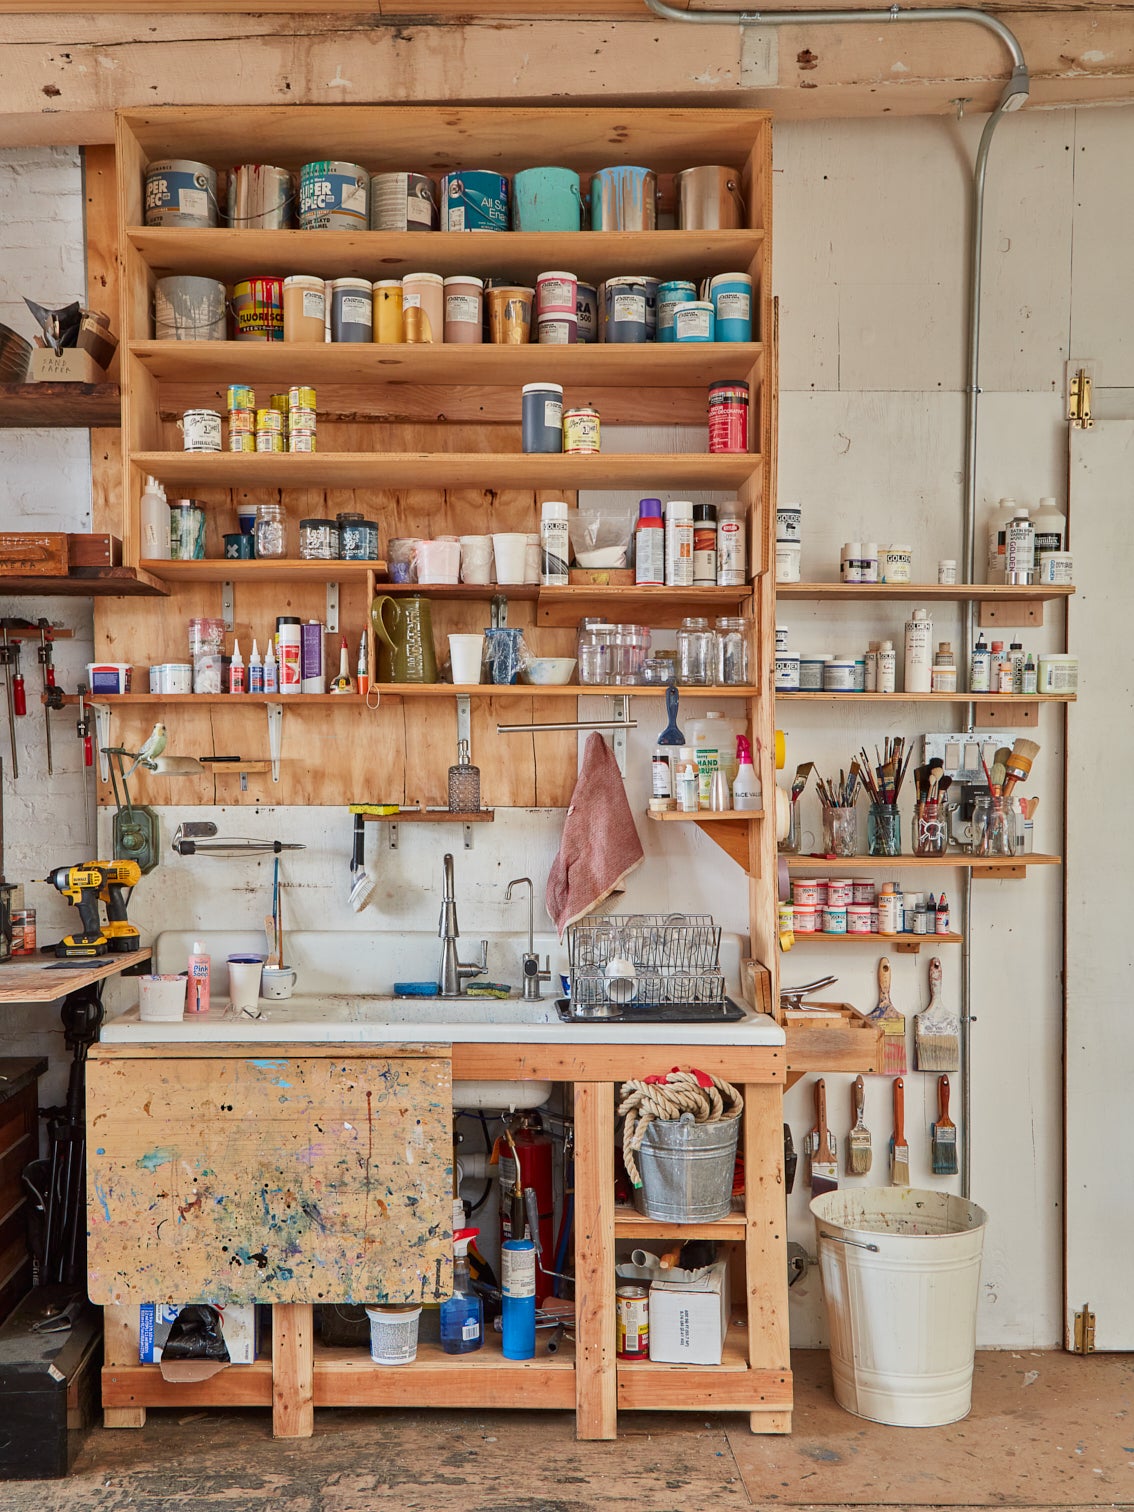 An artist studio's sink space. The white porcelain sink is surrounded by natural wood shelves filled with art supplies.